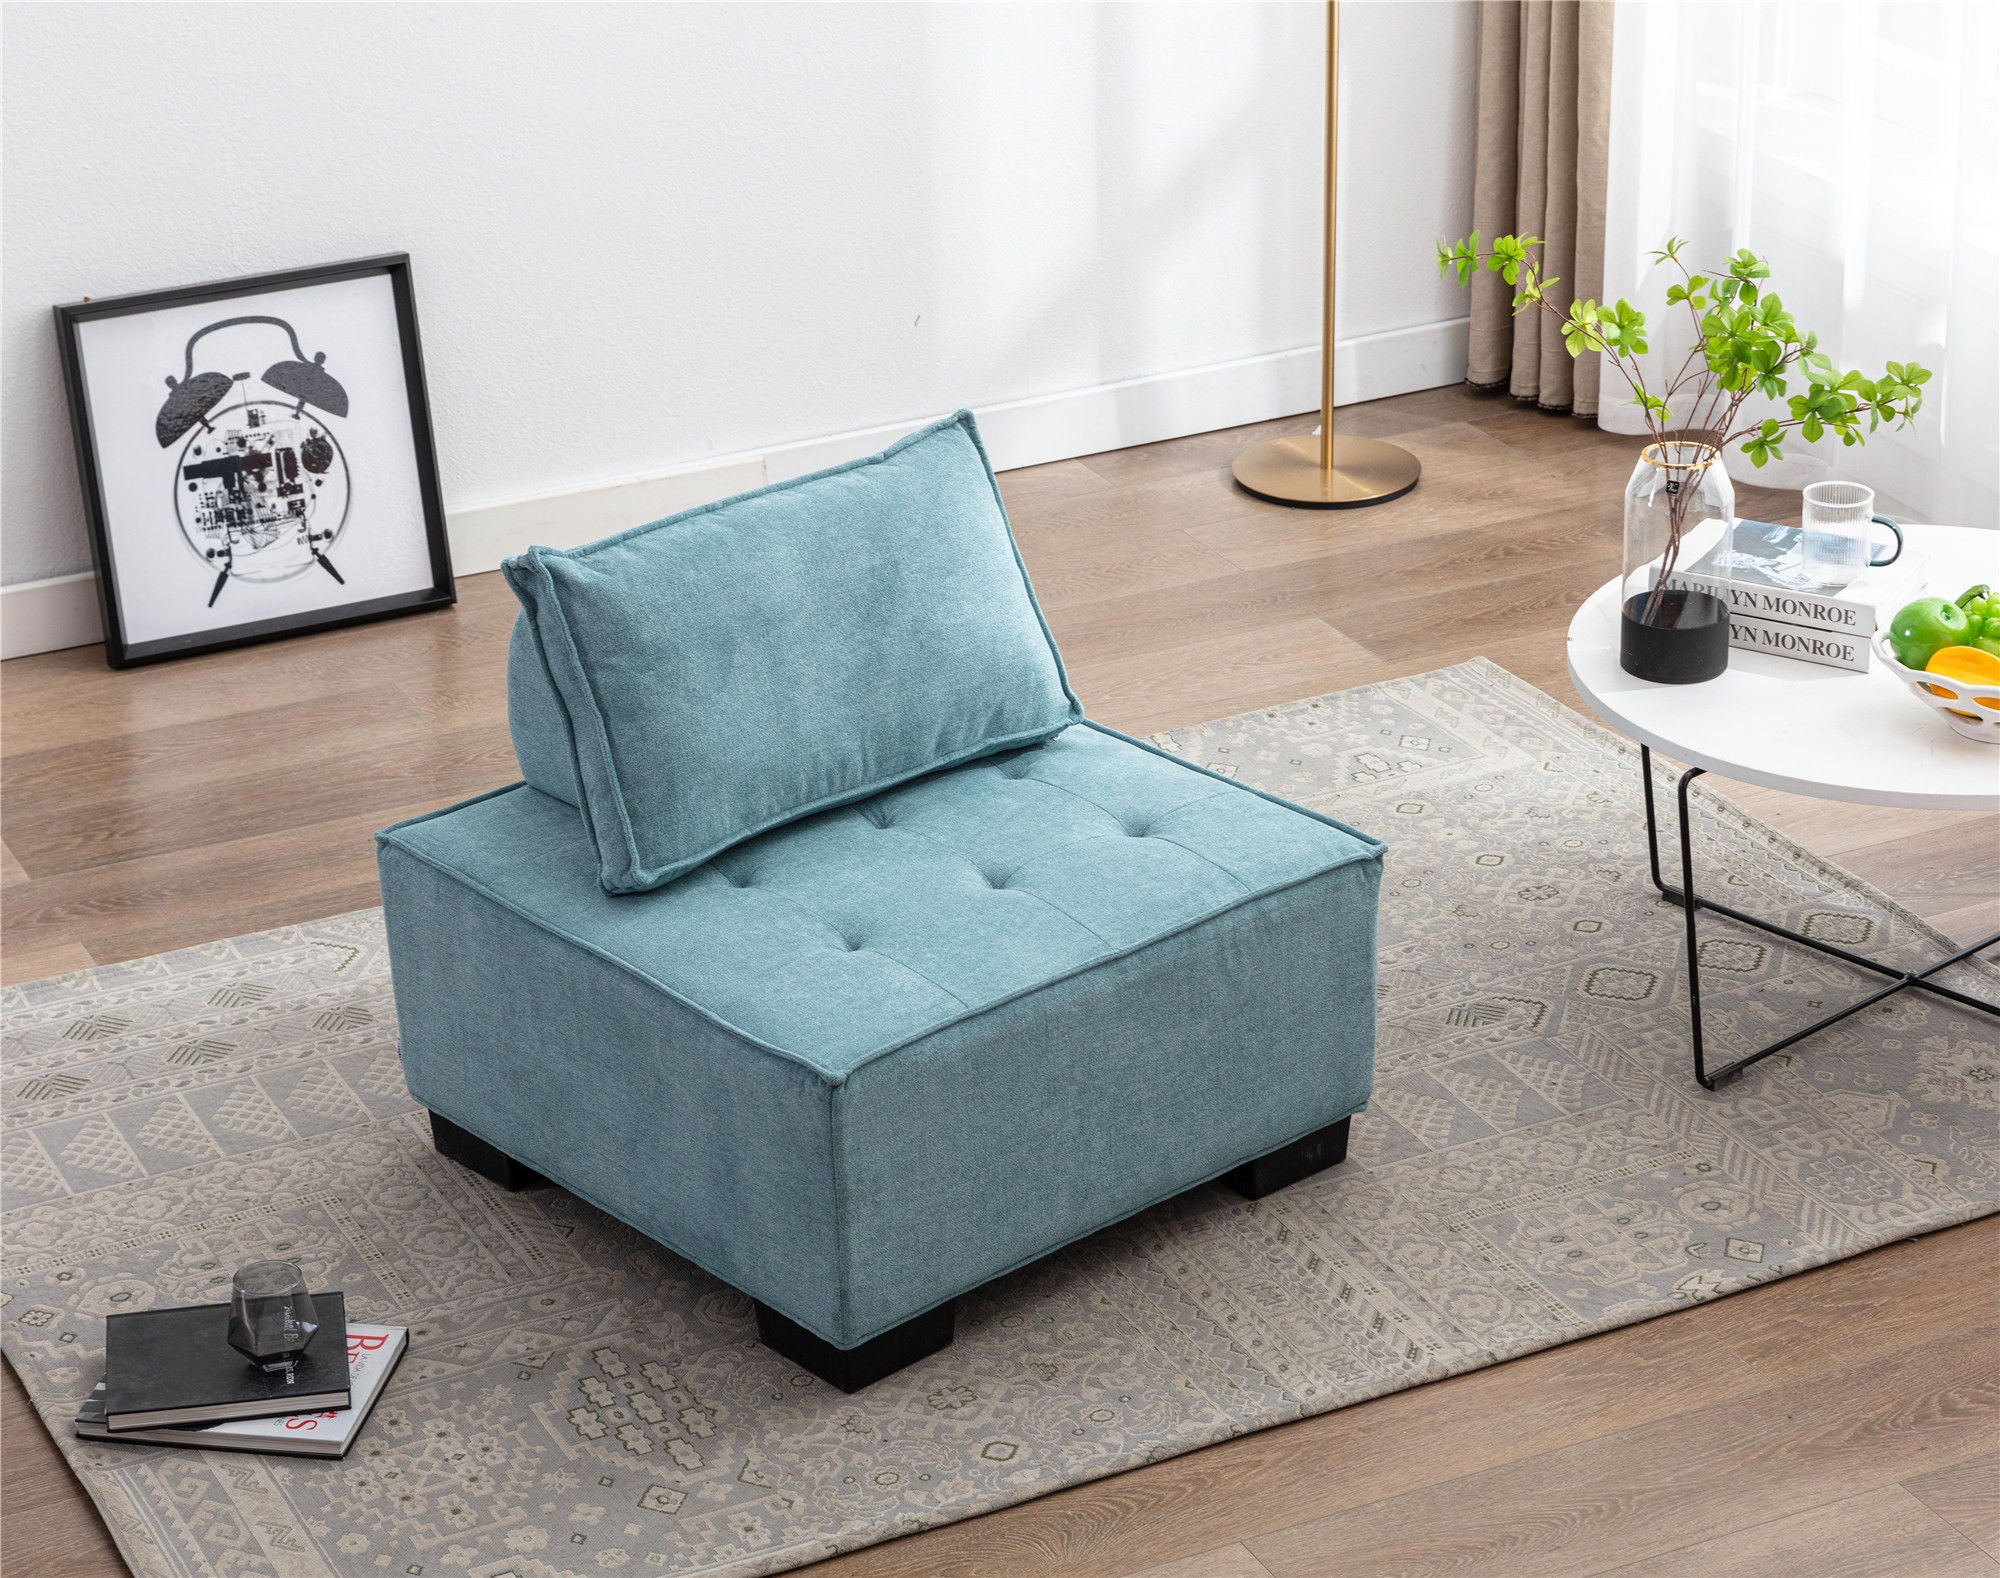 Coomore Ottoman / Lazy Chair - Mint Green